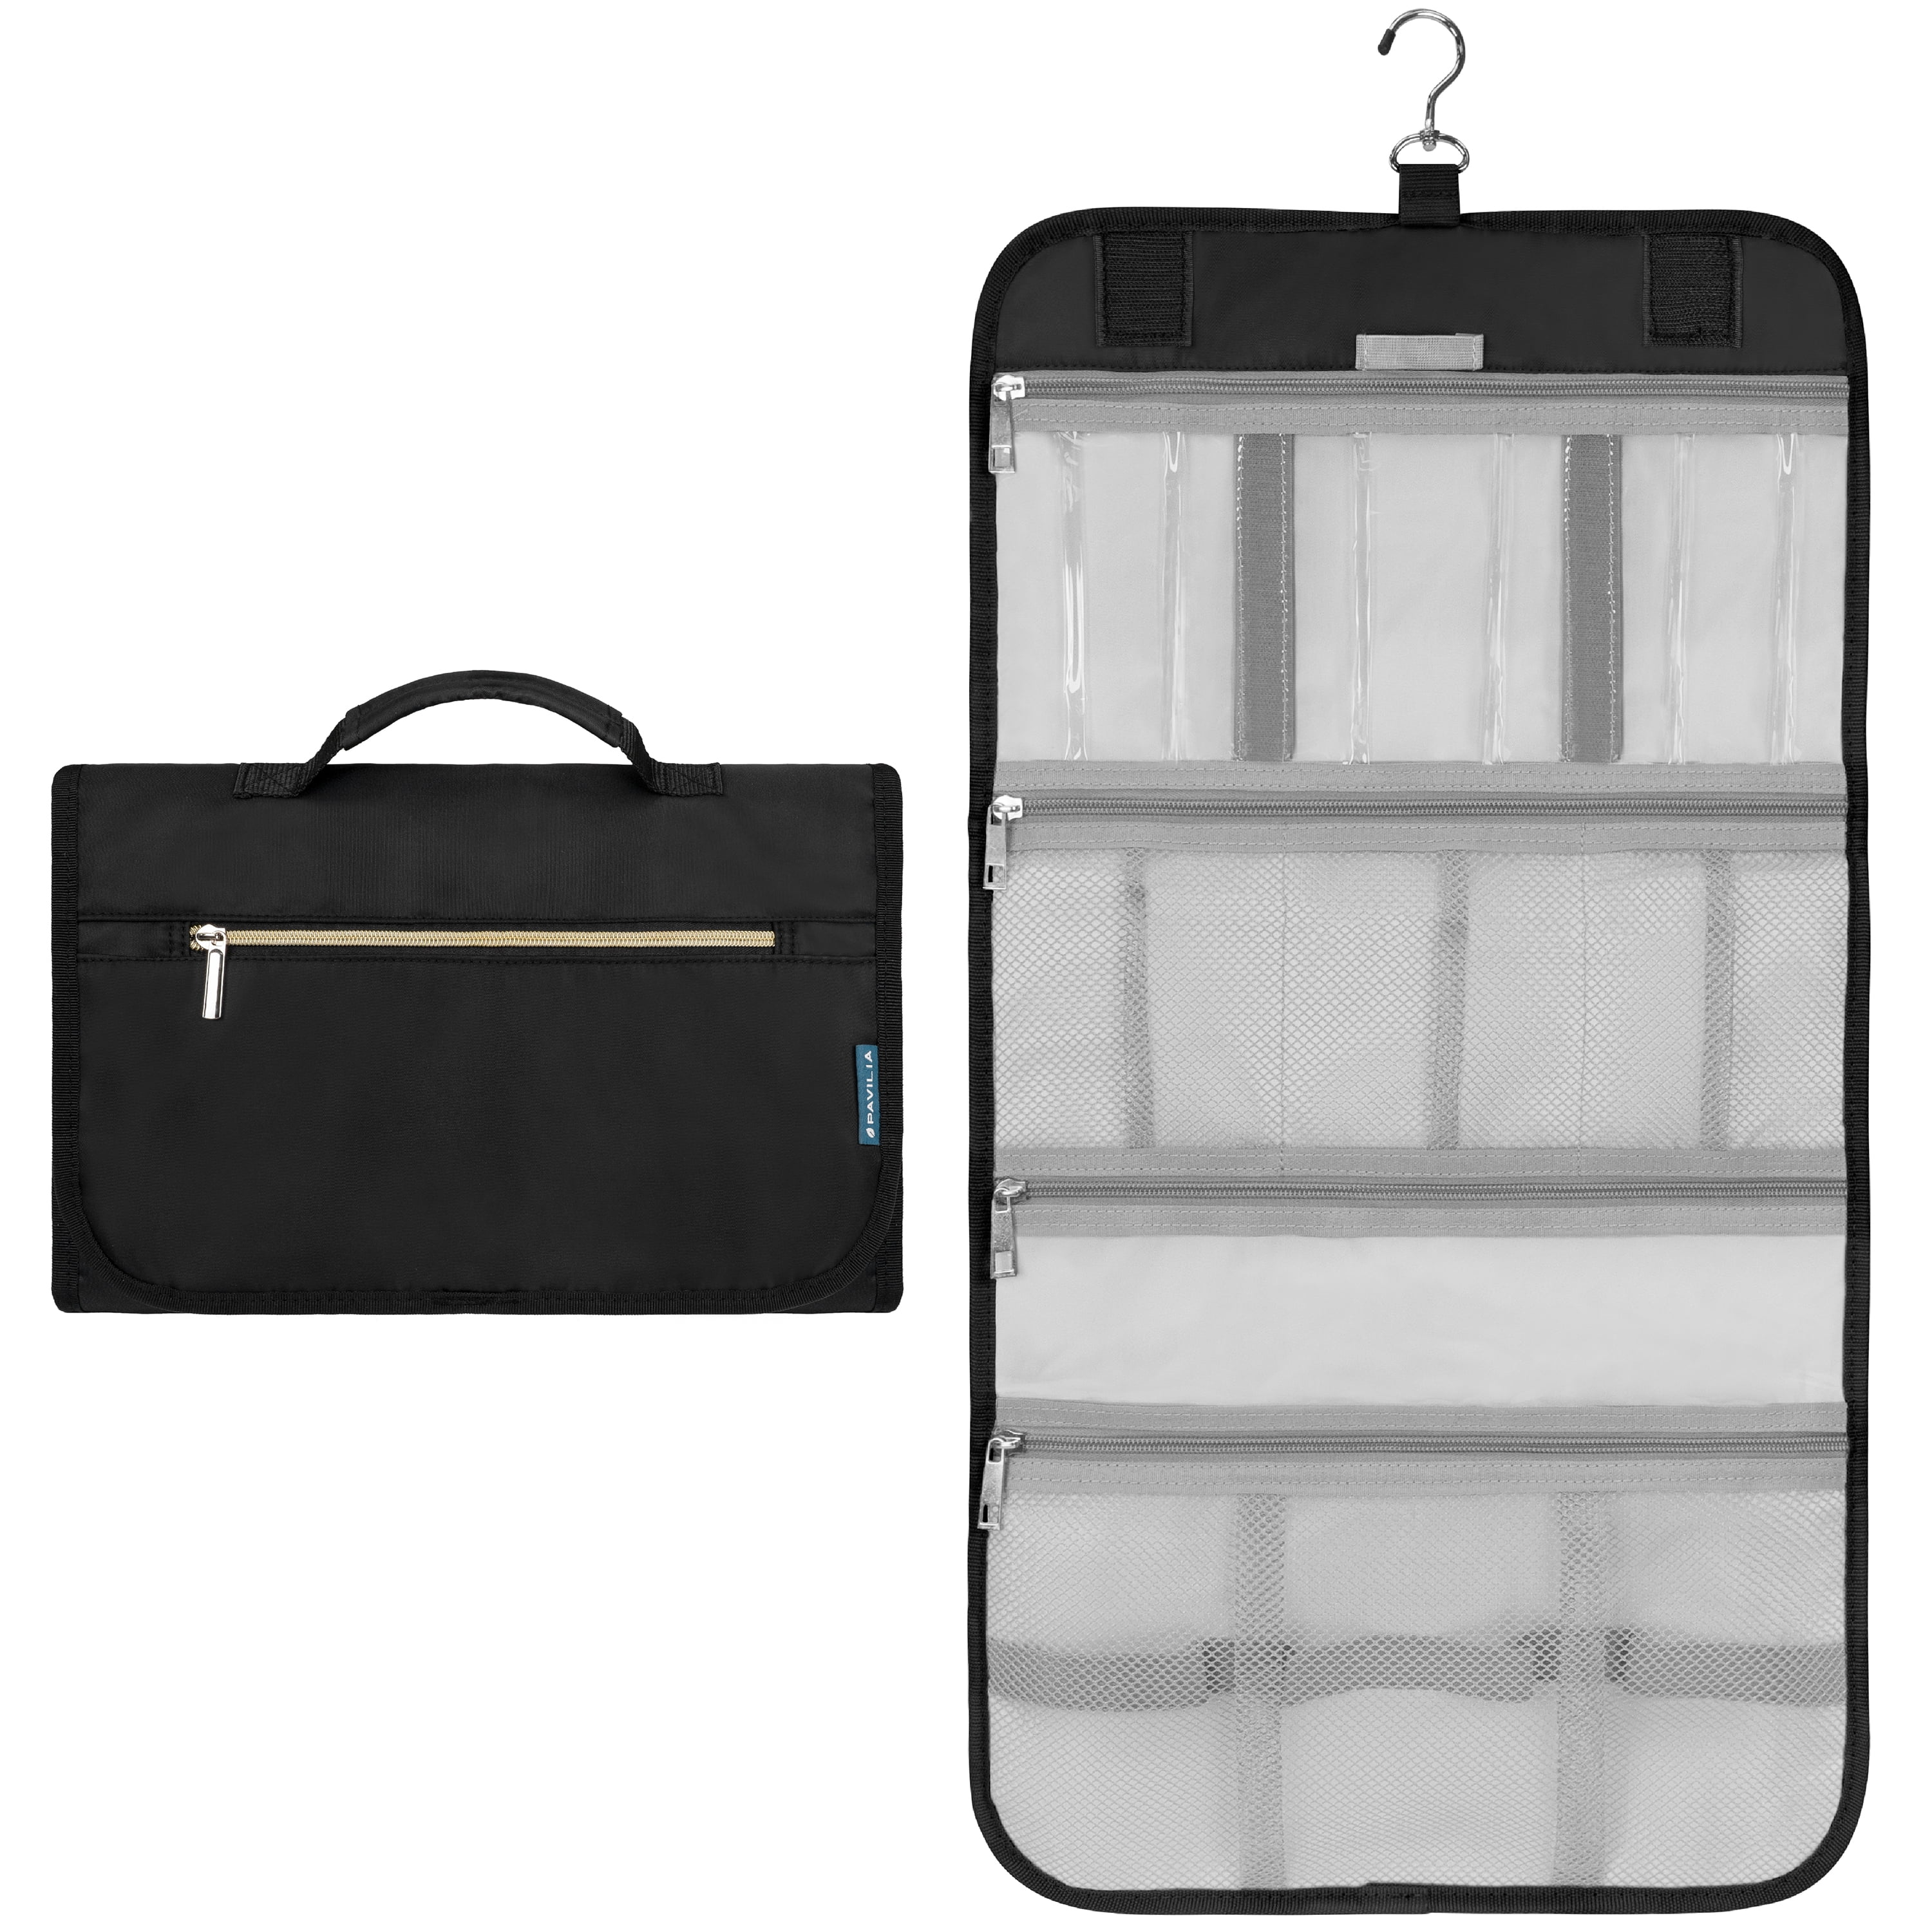 All Men's Luggage & Travel Accessories